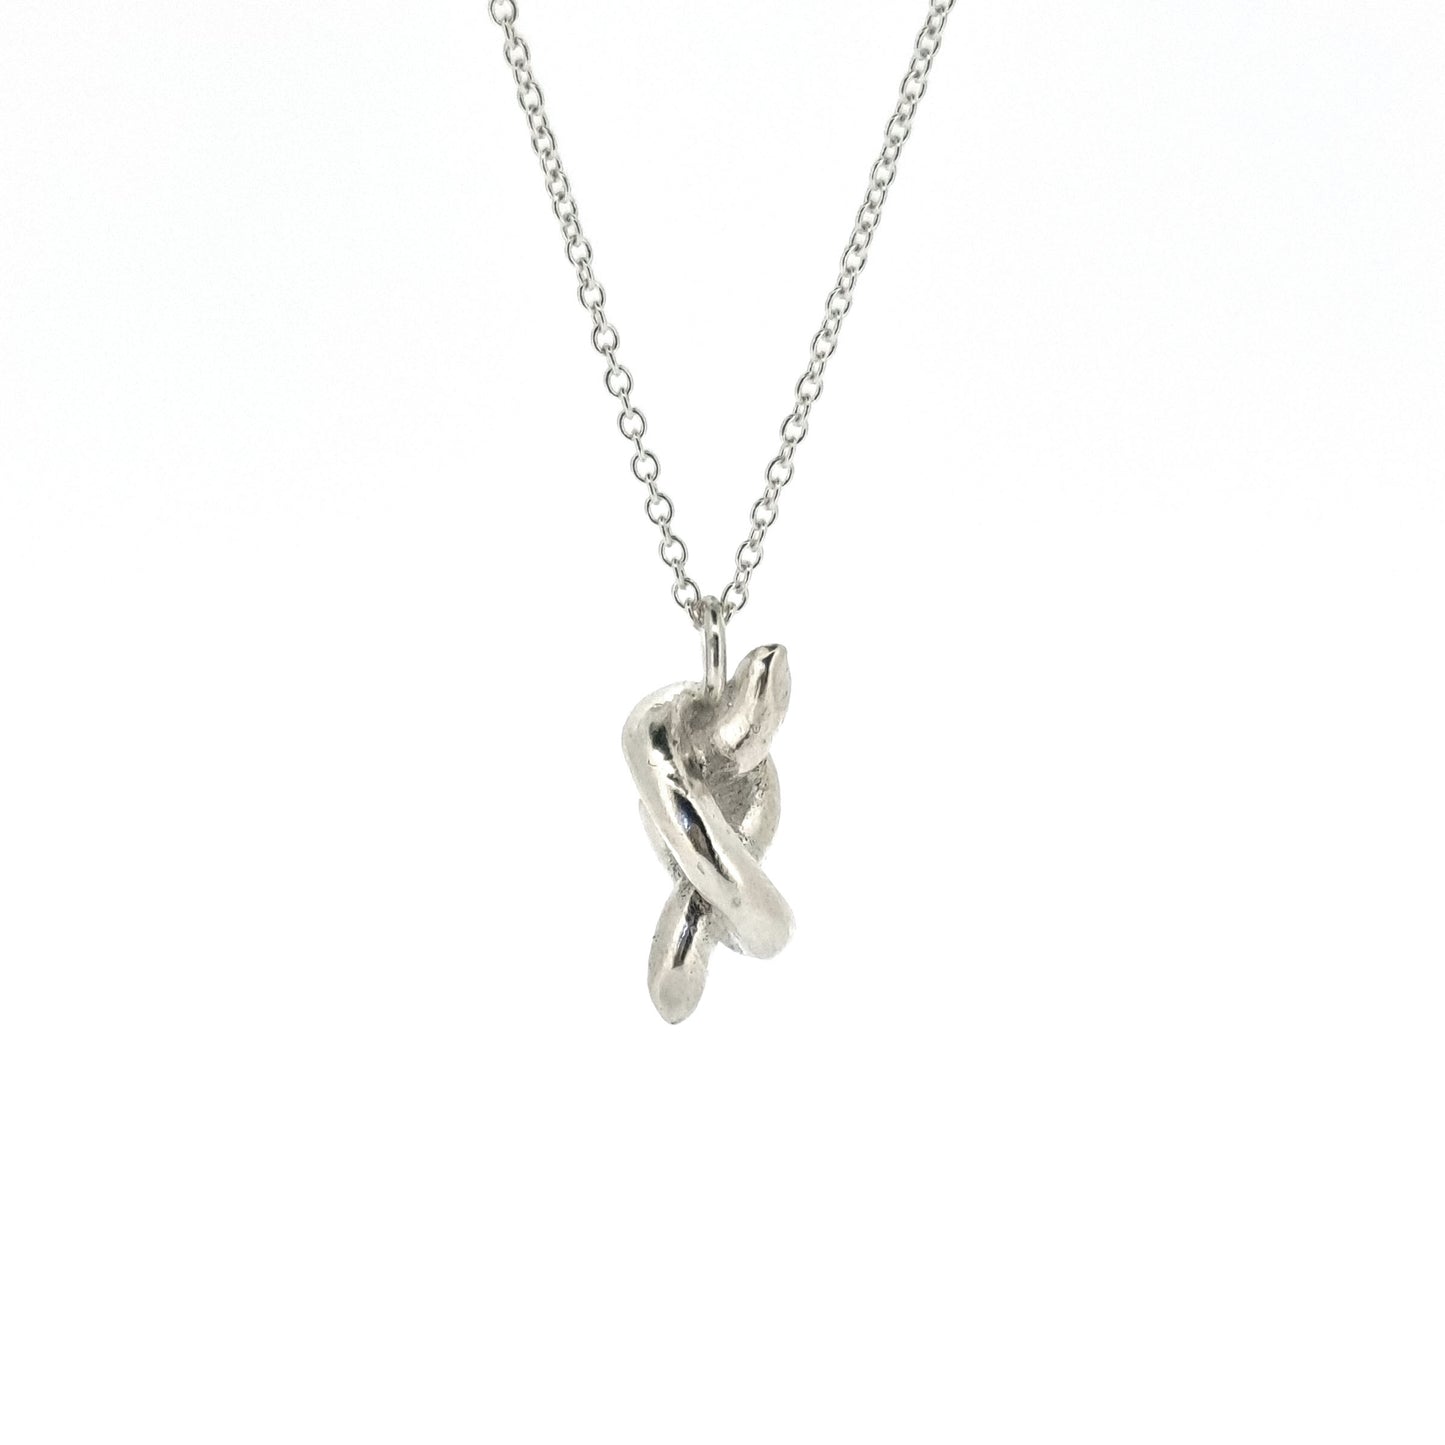 Silver chain with a silver knot pendant.